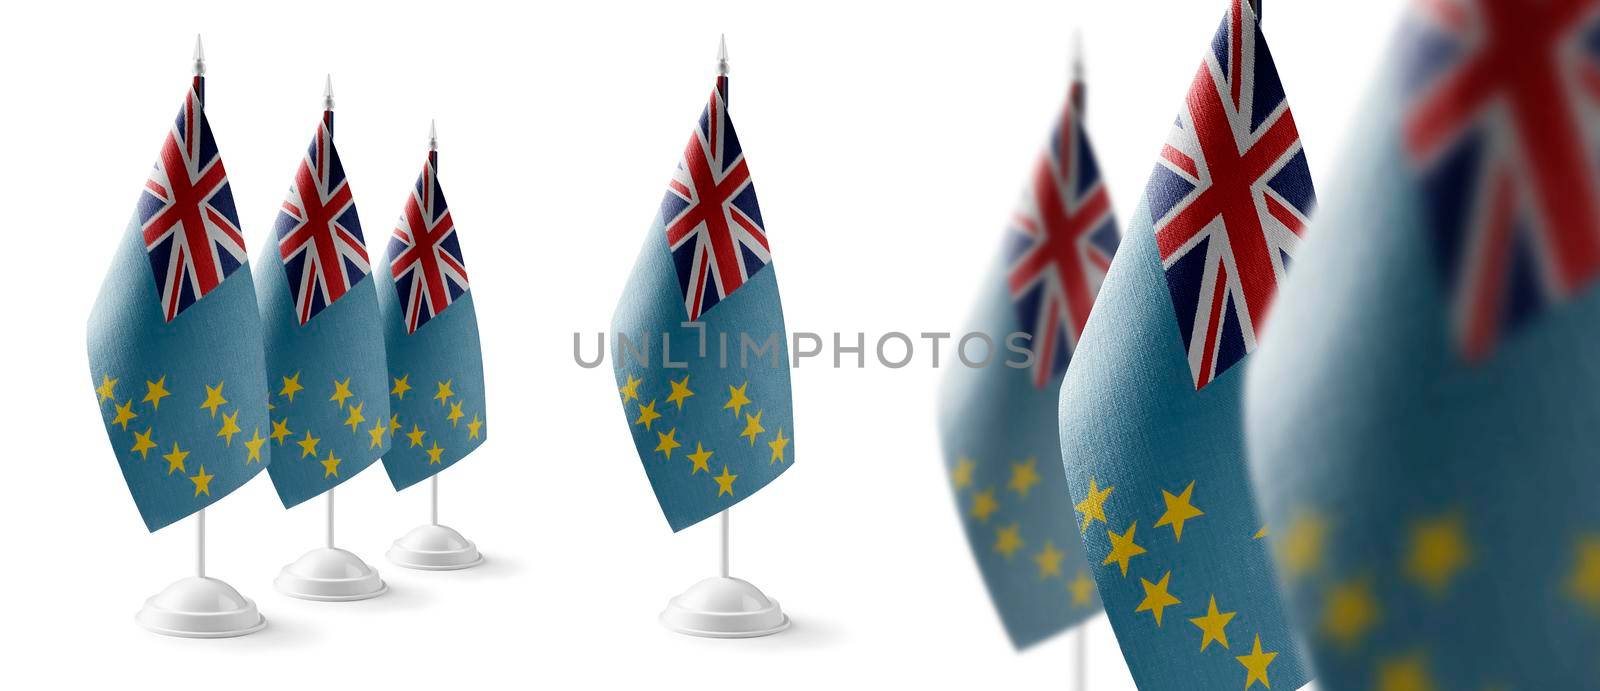 Set of Tuvalu national flags on a white background.